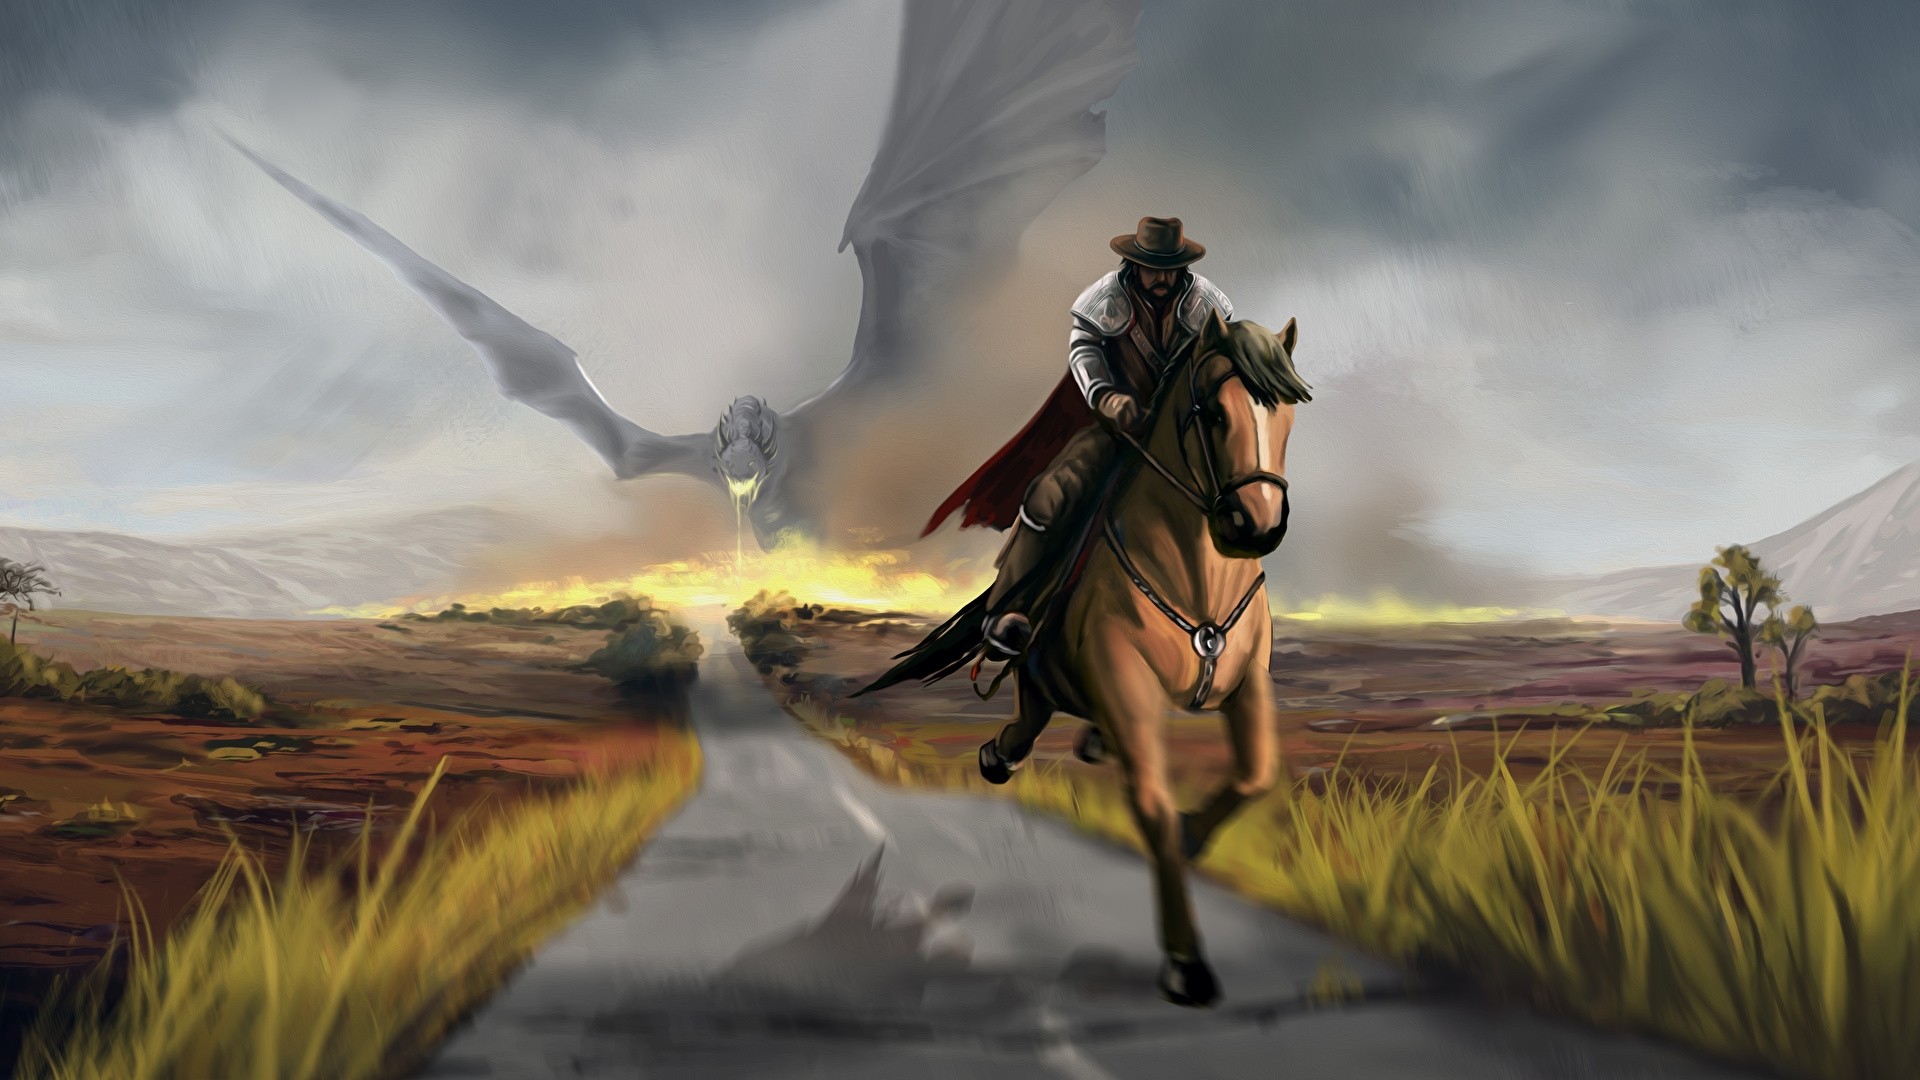 Rider On A Horse Art High Quality